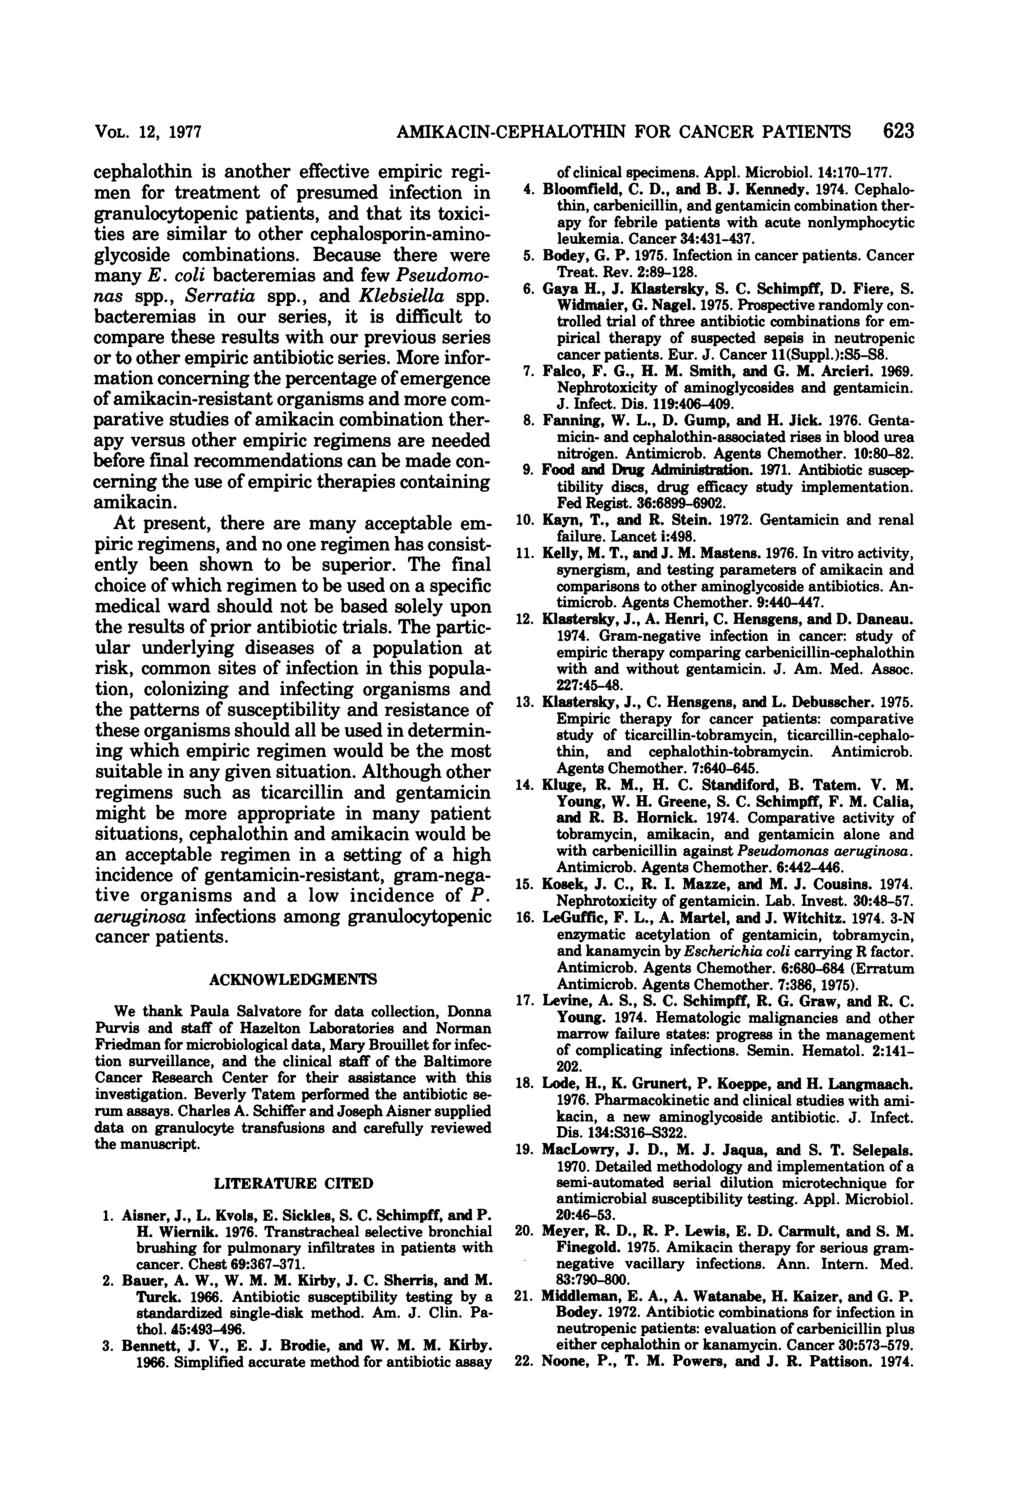 VOL. 12, 1977 cephalothin is another effective empiric regimen for treatment of presumed infection in granulocytopenic patients, and that its toxicities are similar to other